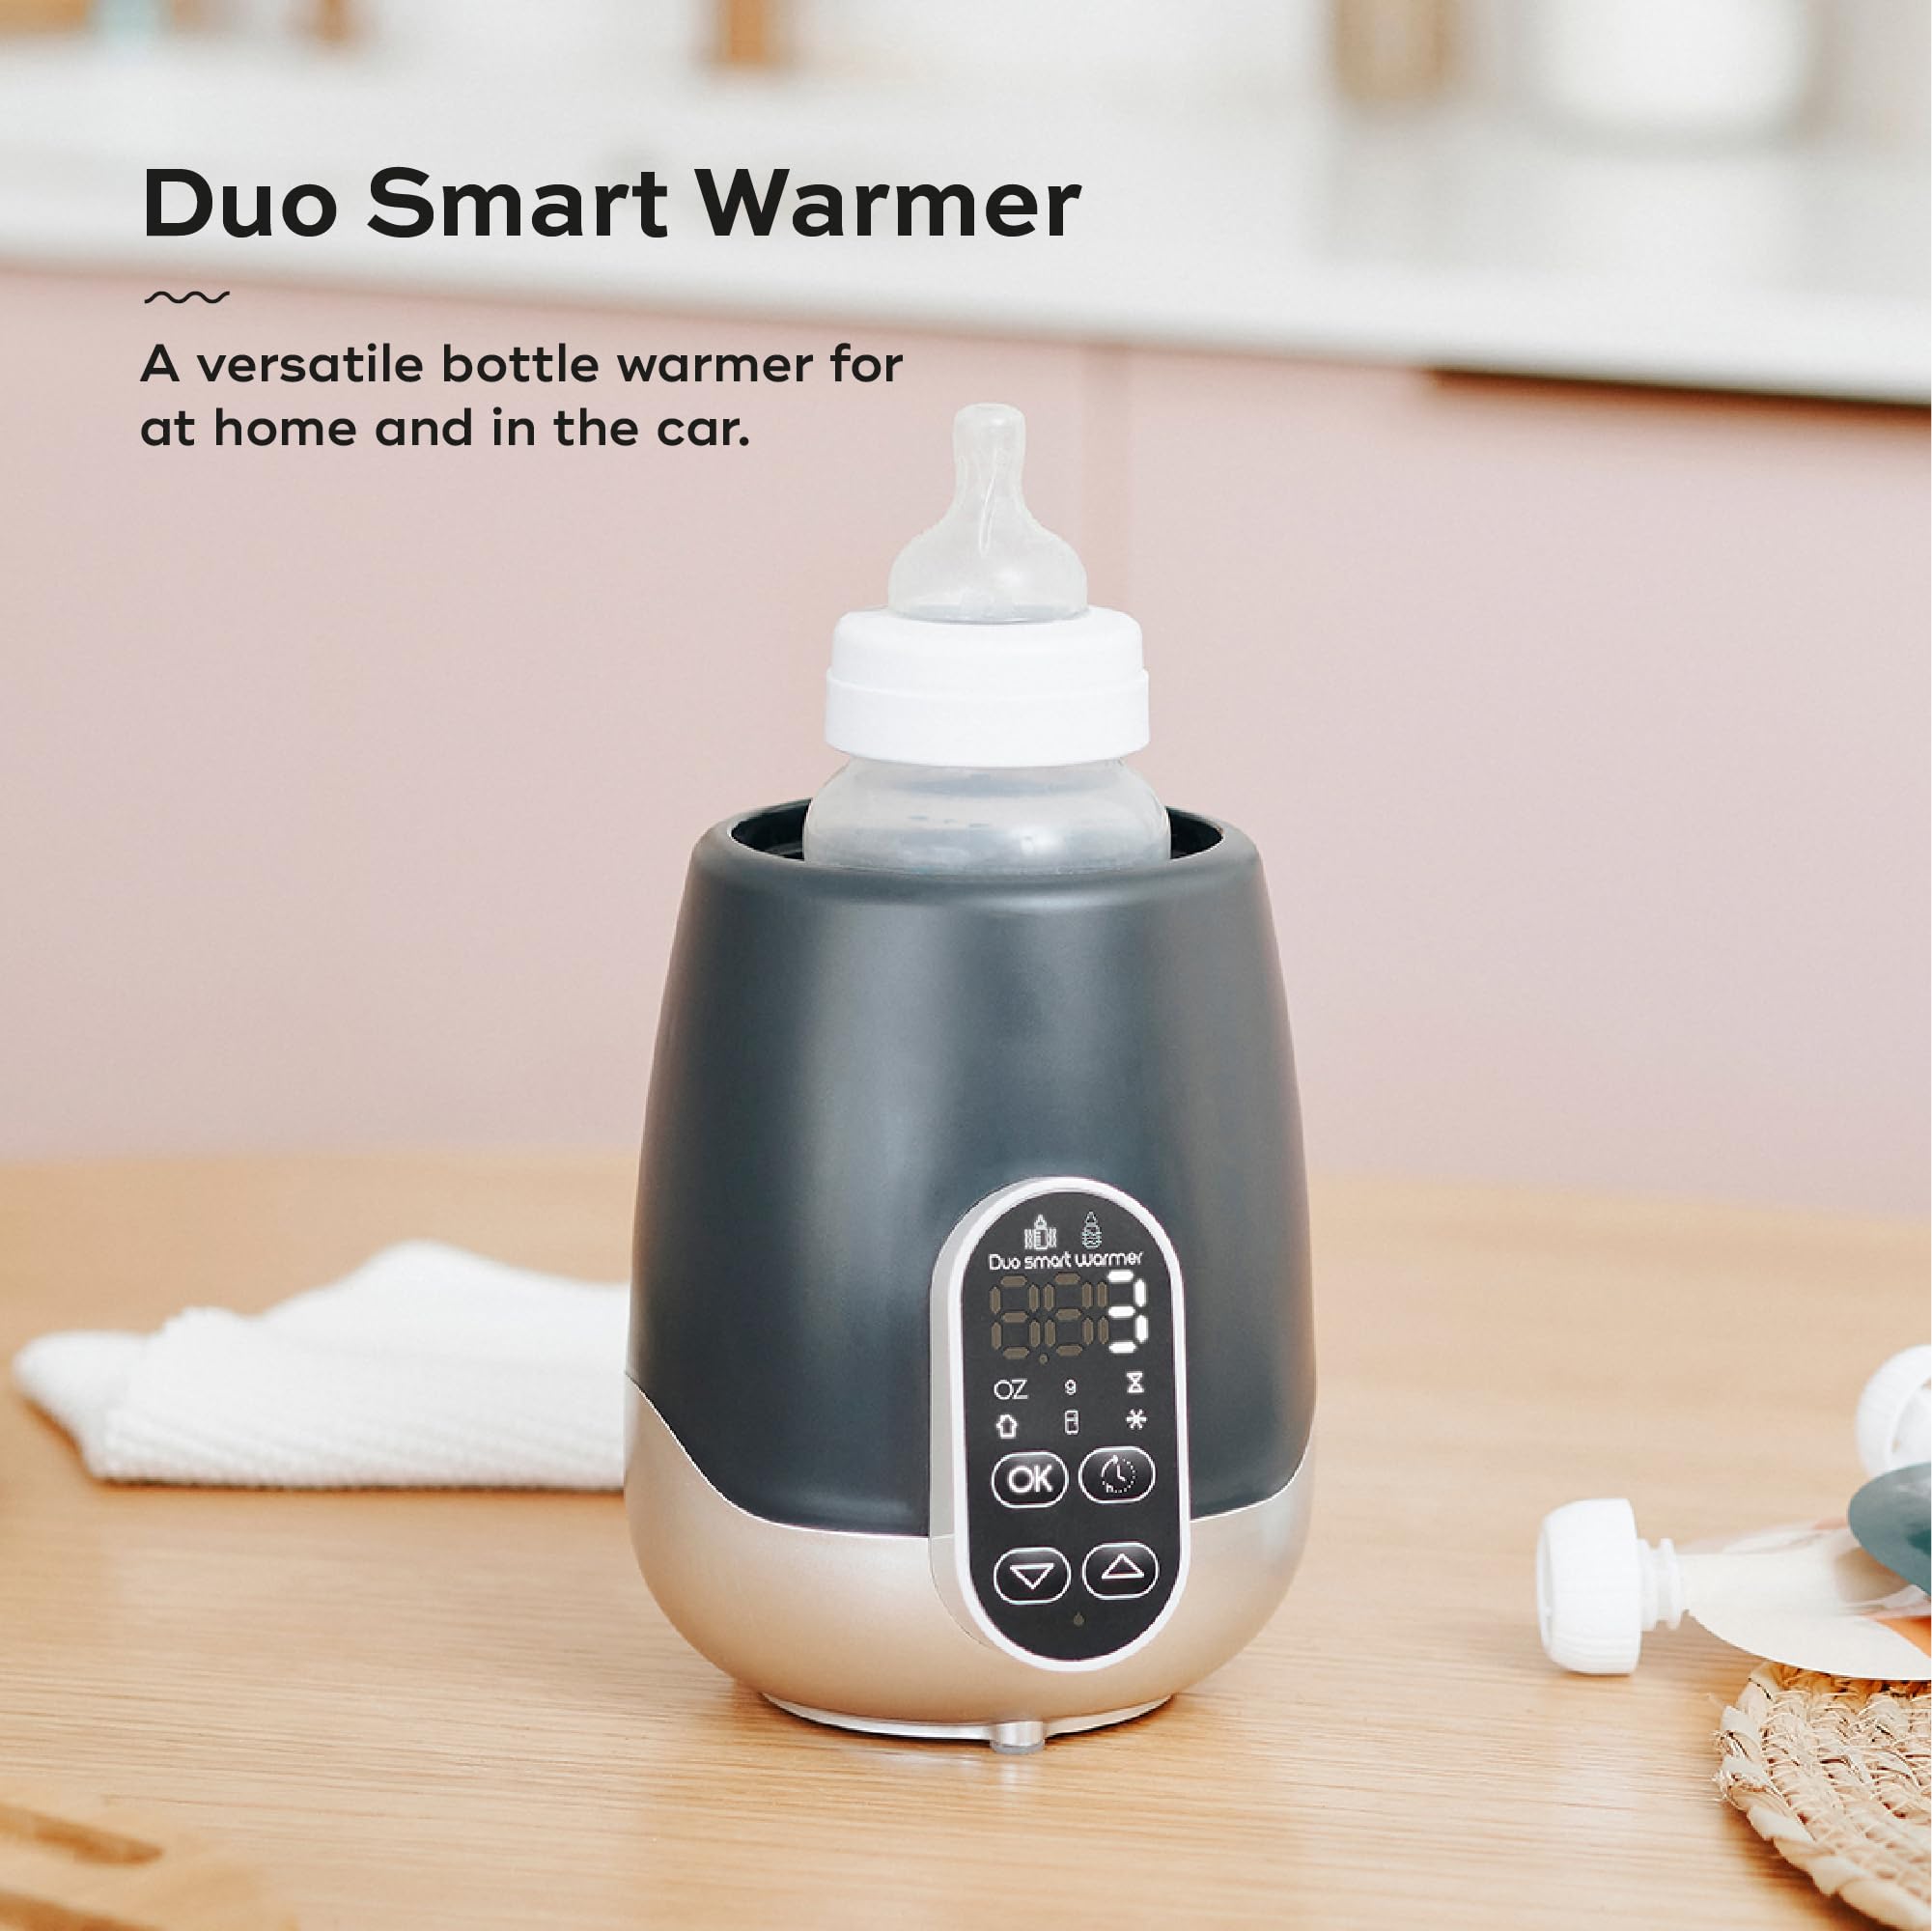 Babymoov Duo Smart Bottle Warmer - 2-in-1 Car and Home, Fast, Programmable, and Portable for Breastmilk or Baby Formula (Multi-Purpose and Universal)